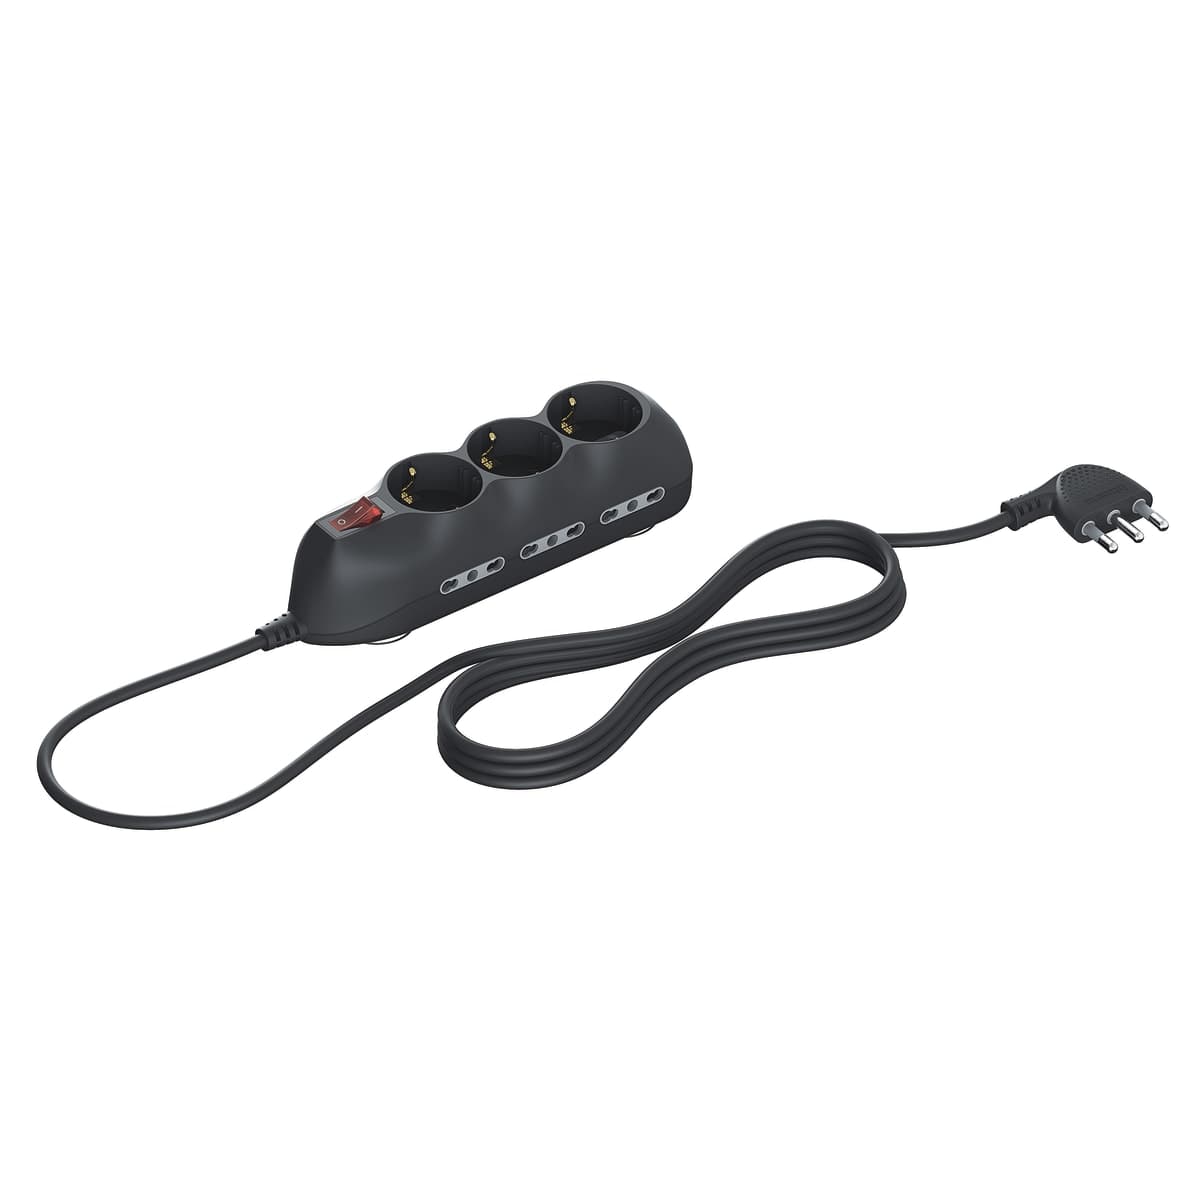 MULTISOCKET 16A PLUG 9 PLACES 3 UNIVERSAL 6 10/16A WITH 1.5 M CABLE WITH SWITCH - best price from Maltashopper.com BR420003030